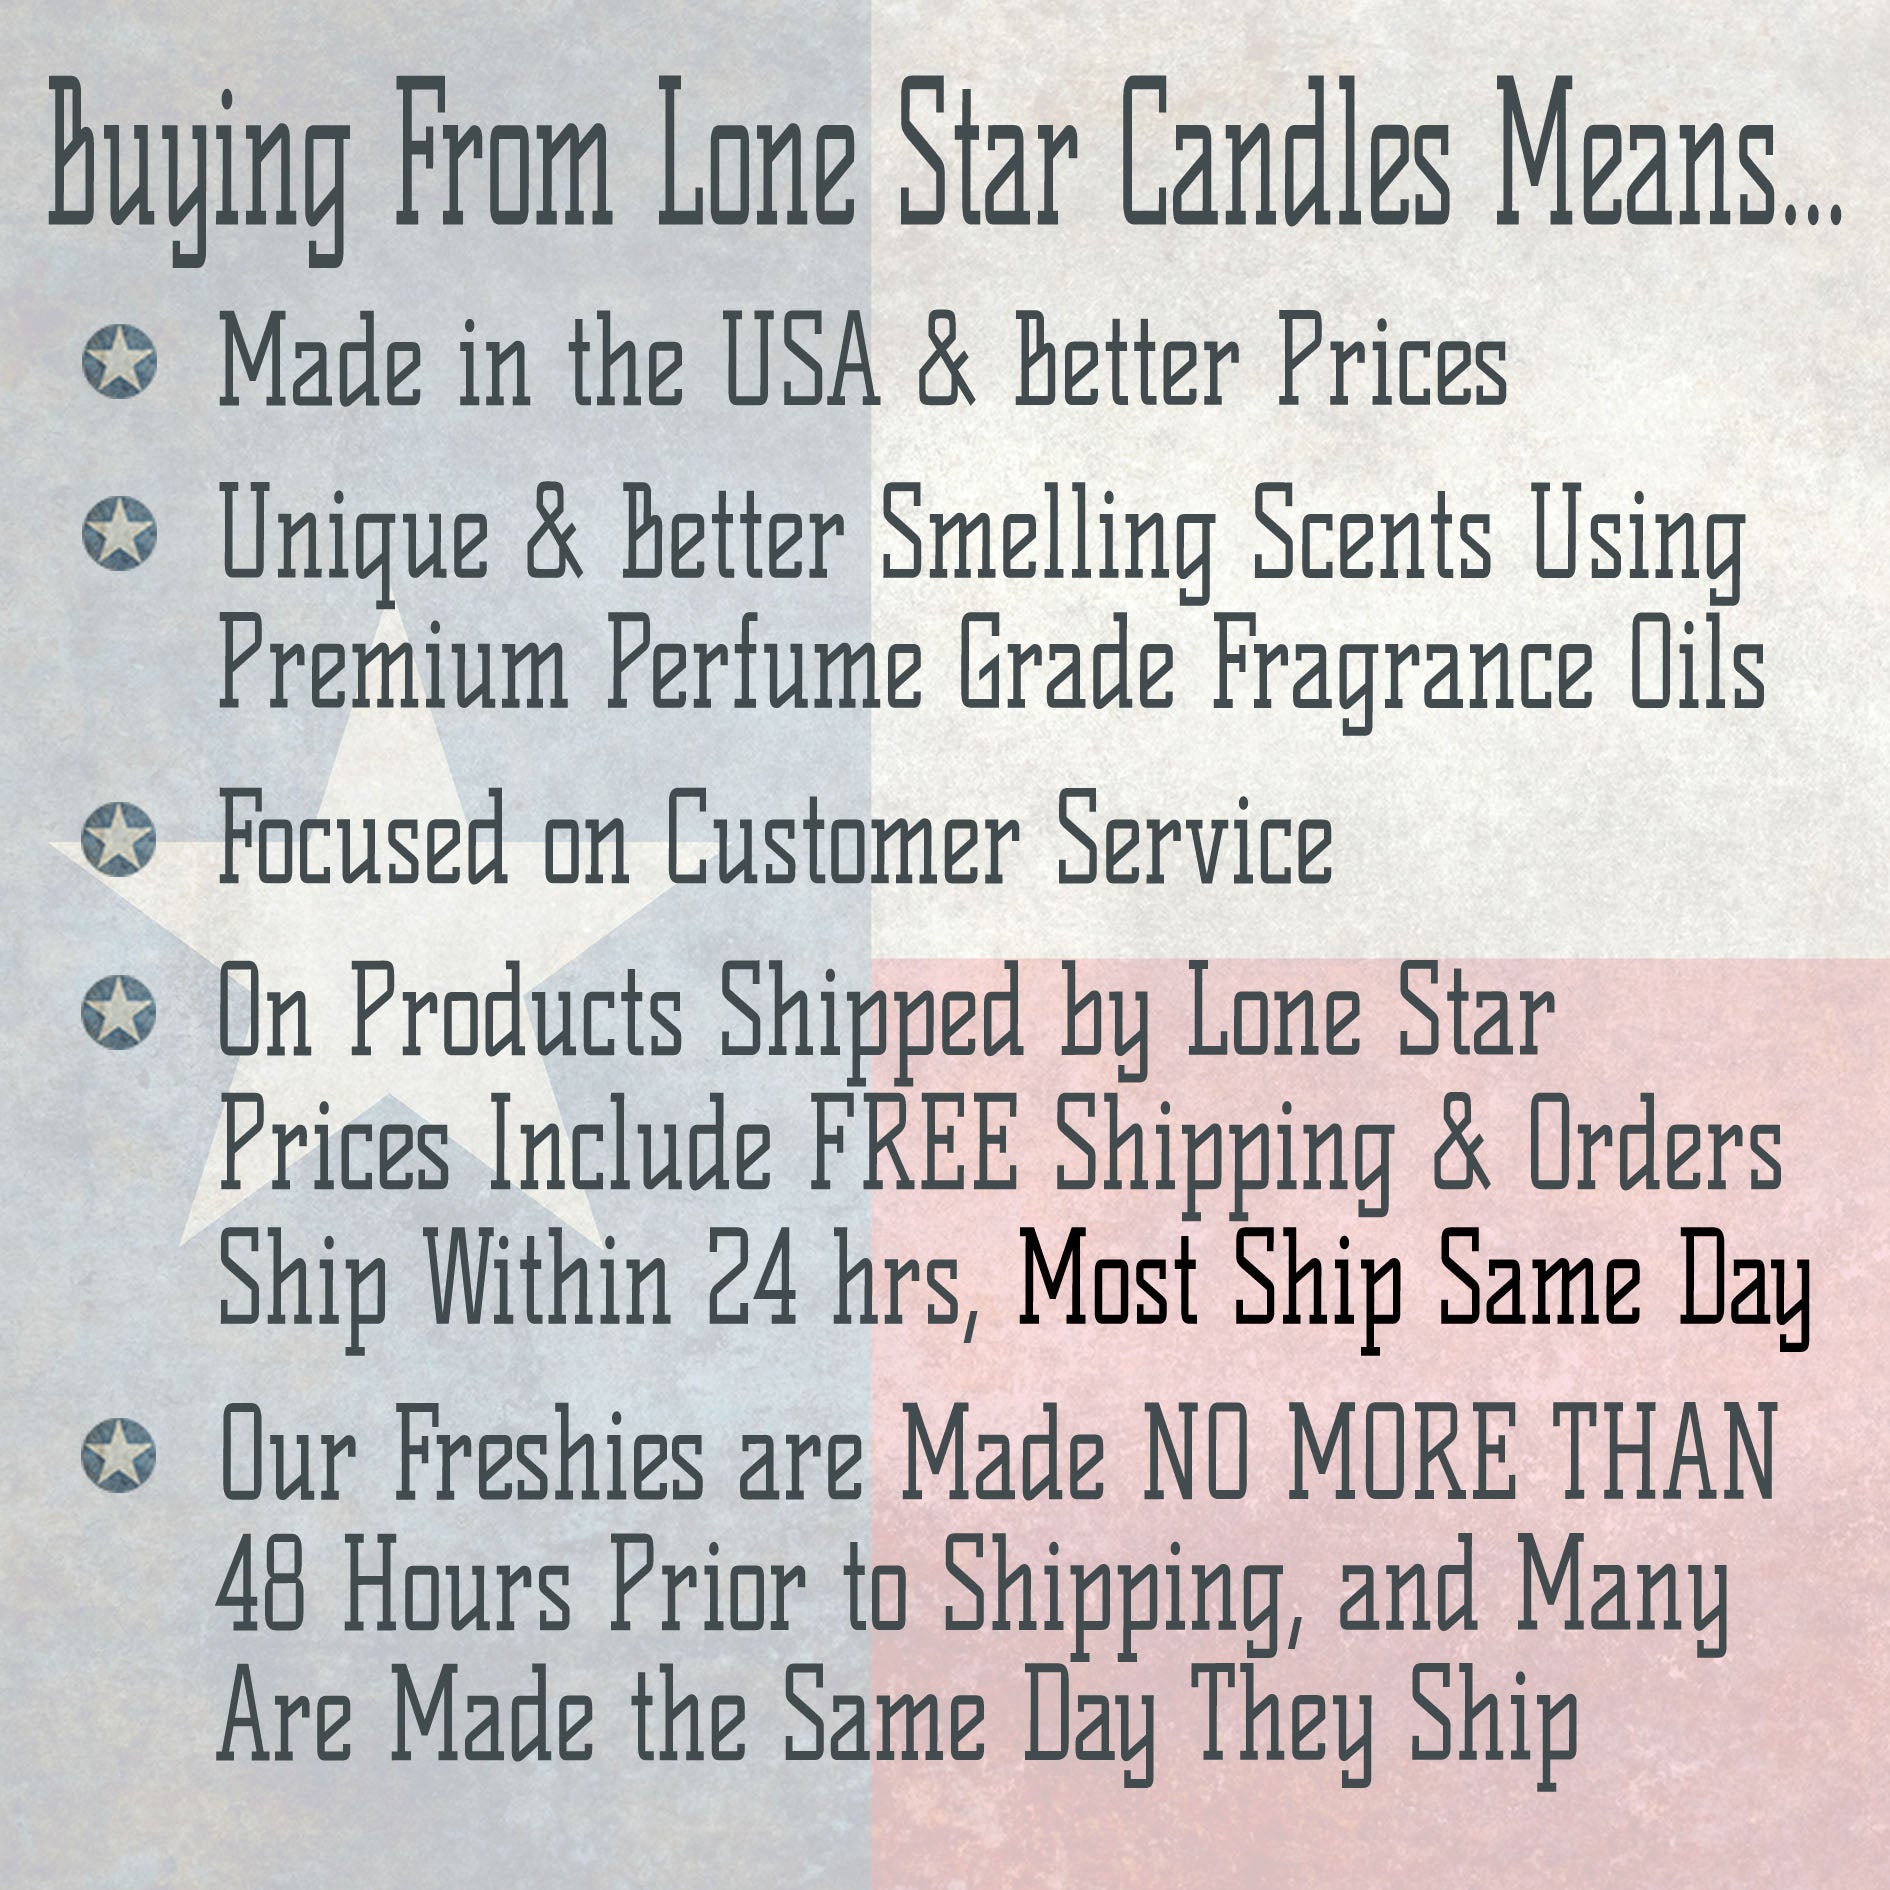 Strawberry Leather, Lone Star Candles & More's Premium Strongly Scented Freshies, Genuine Leather Aroma with Sweet & Juicy Strawberries, Car & Air Freshener, USA & Texas Made, Pumpkin 1-Pack